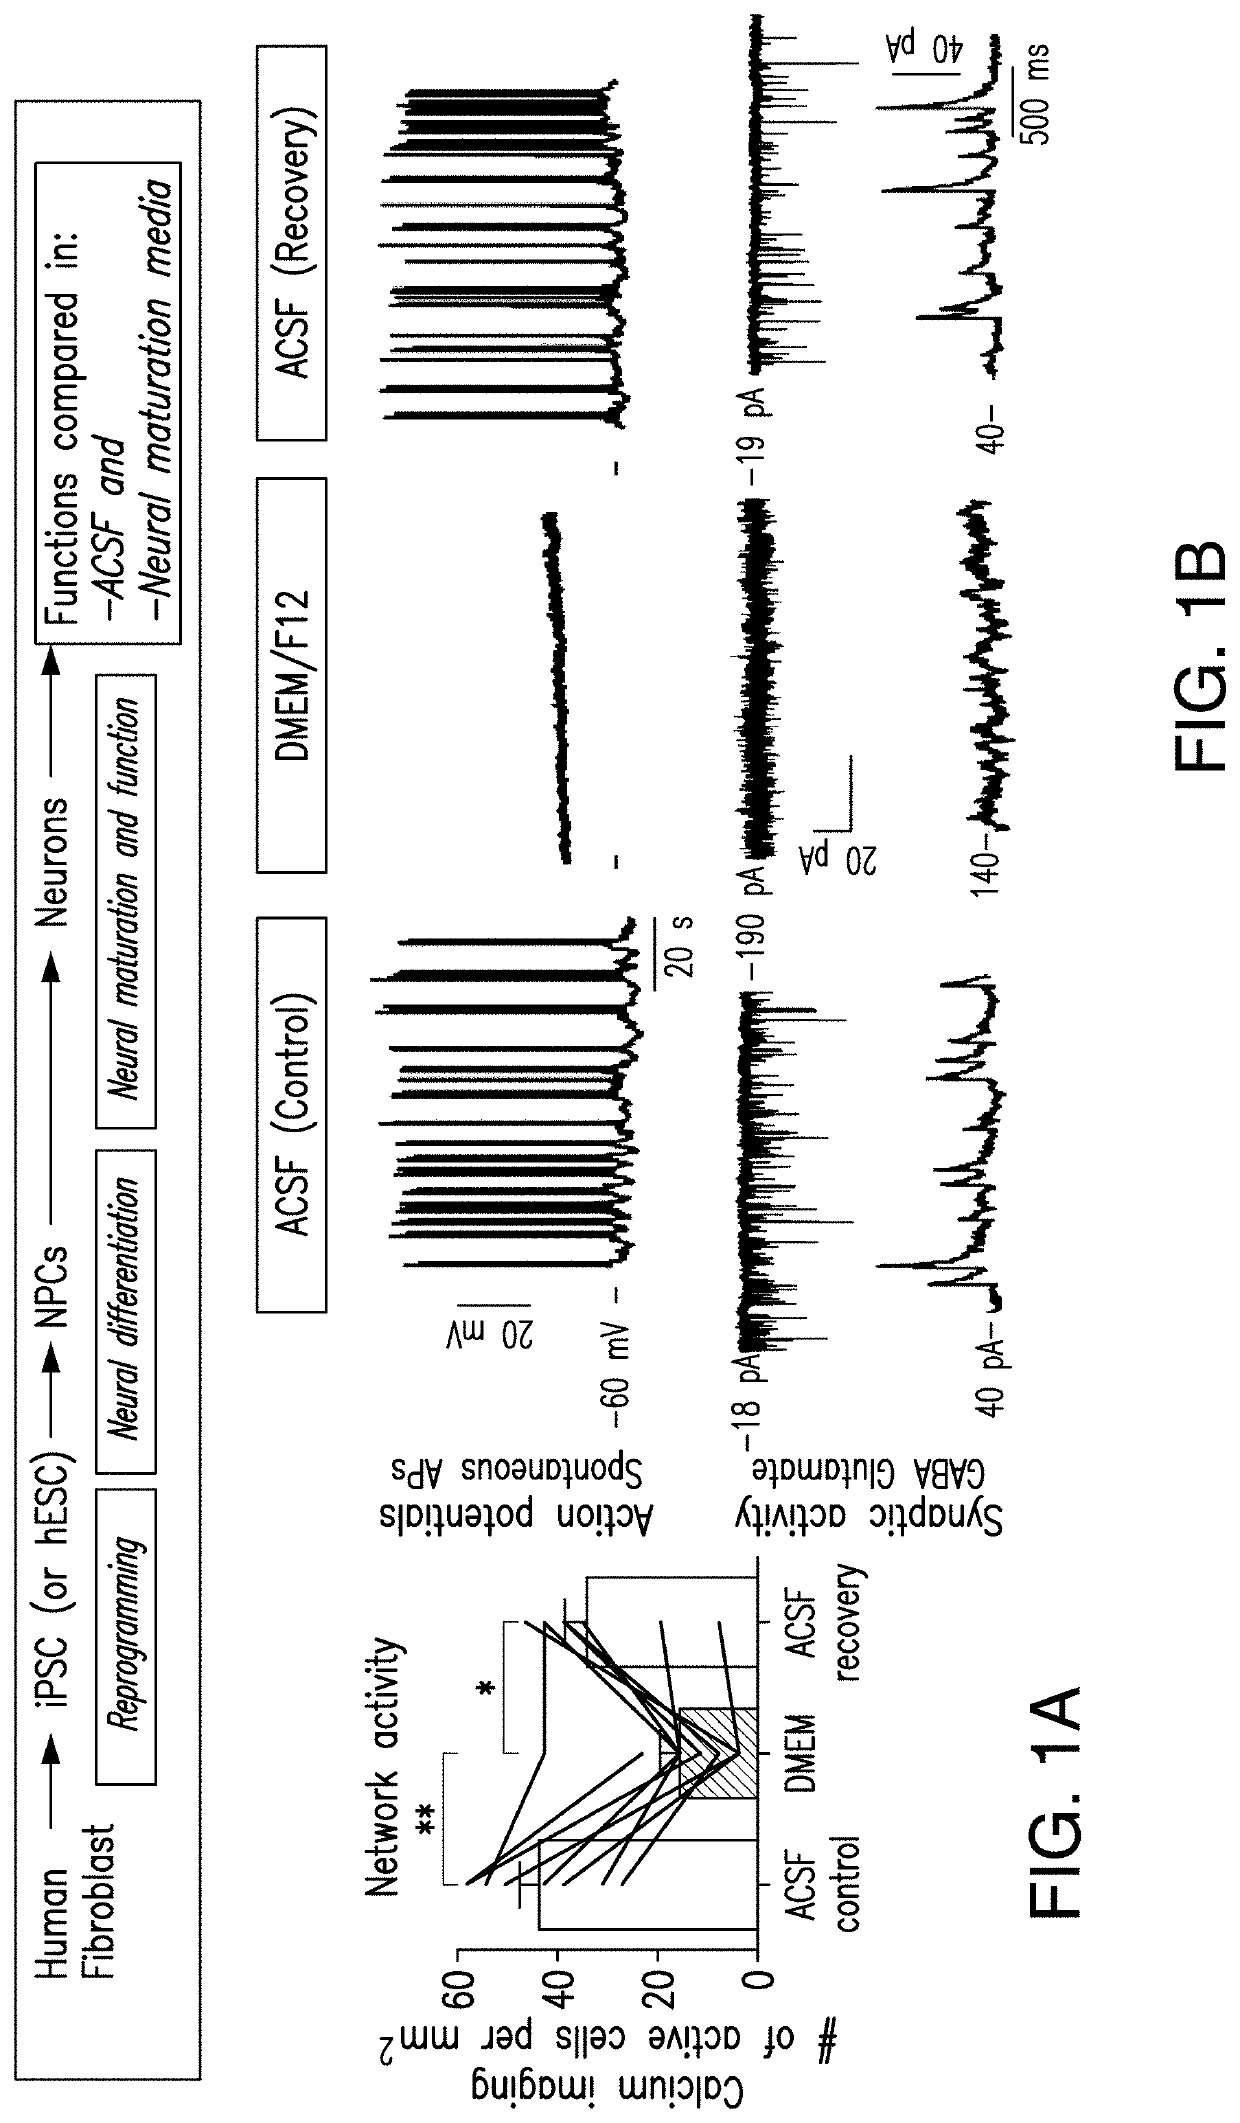 Media compositions for neuronal cell culture